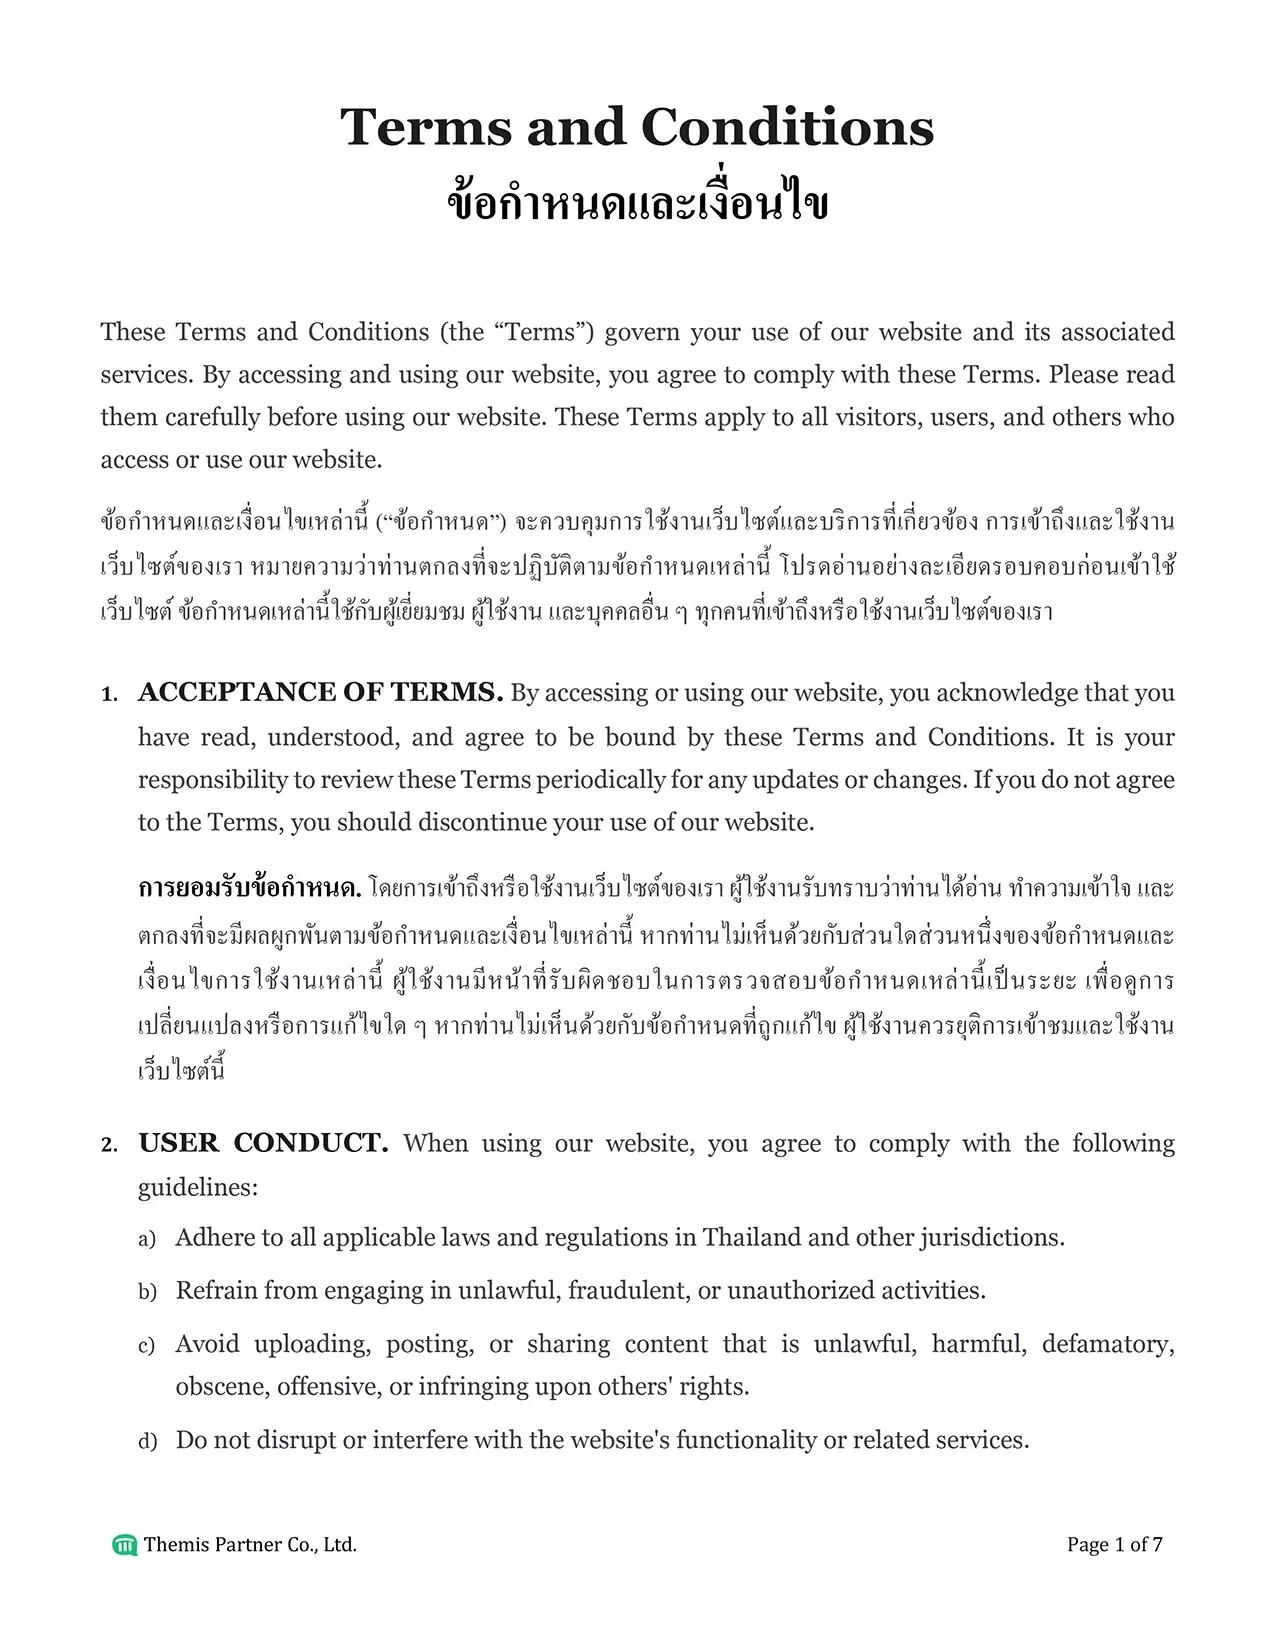 Terms and conditions Thailand 1